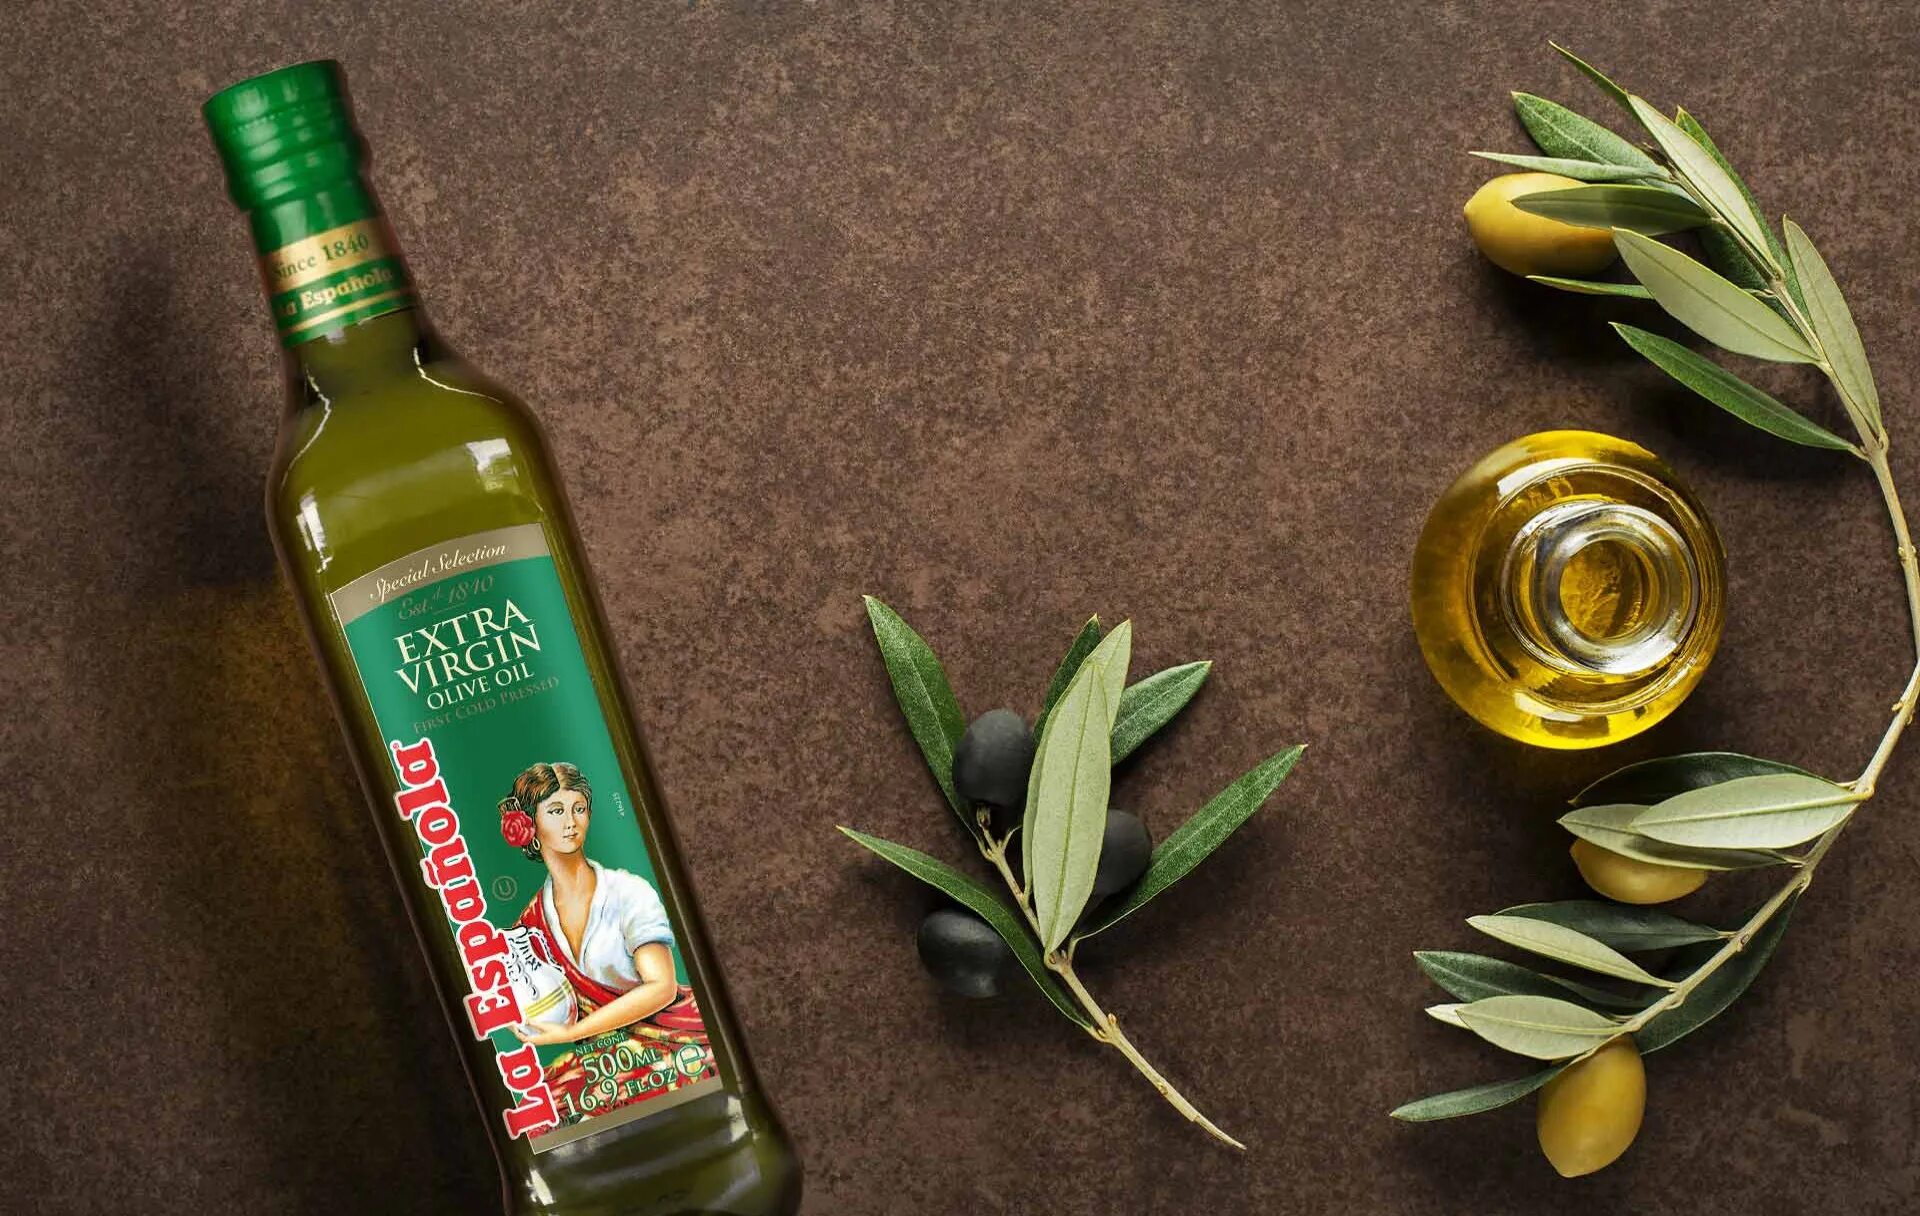 Olive Oil масло оливковое. San Michele Olive Oil. Олив Ойл масло оливковое. Оливки и оливковое масло. Фирма оливкового масла